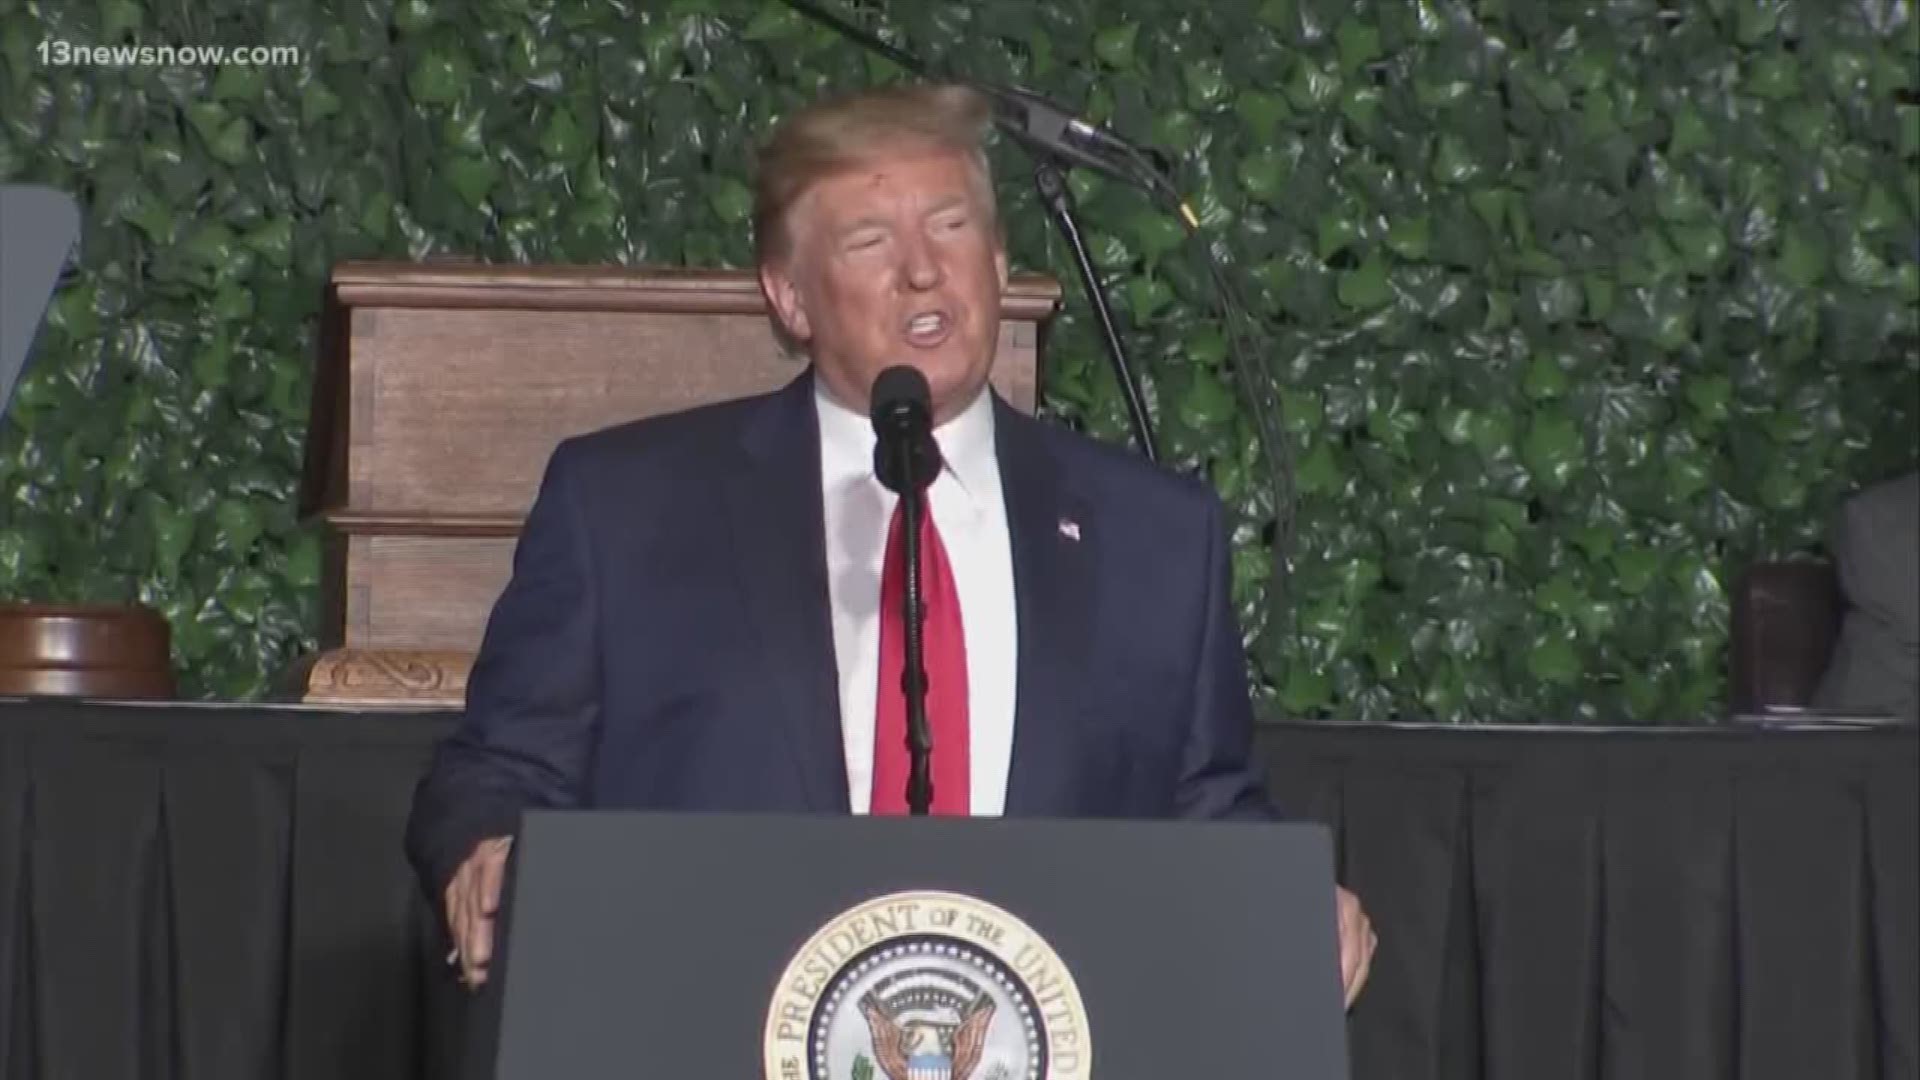 President Donald Trump was among the people who gathered at Jamestown Settlement to mark the 400th anniversary of the first meeting of the Virginia General Assembly.